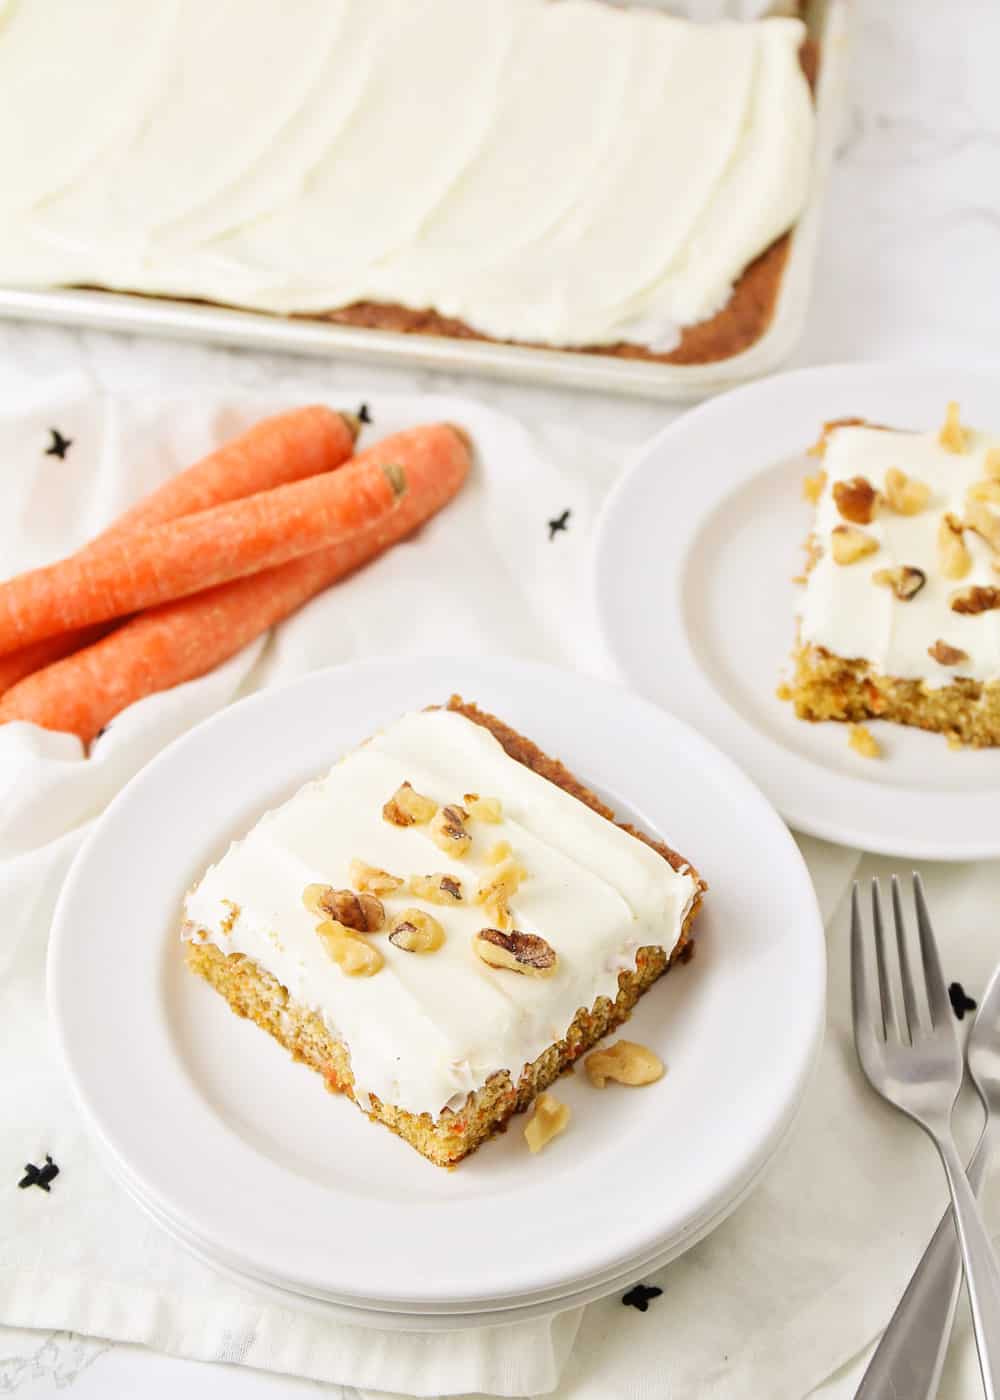 Easy Carrot cake recipe slice on a plate topped with cream cheese frosting and walnuts.